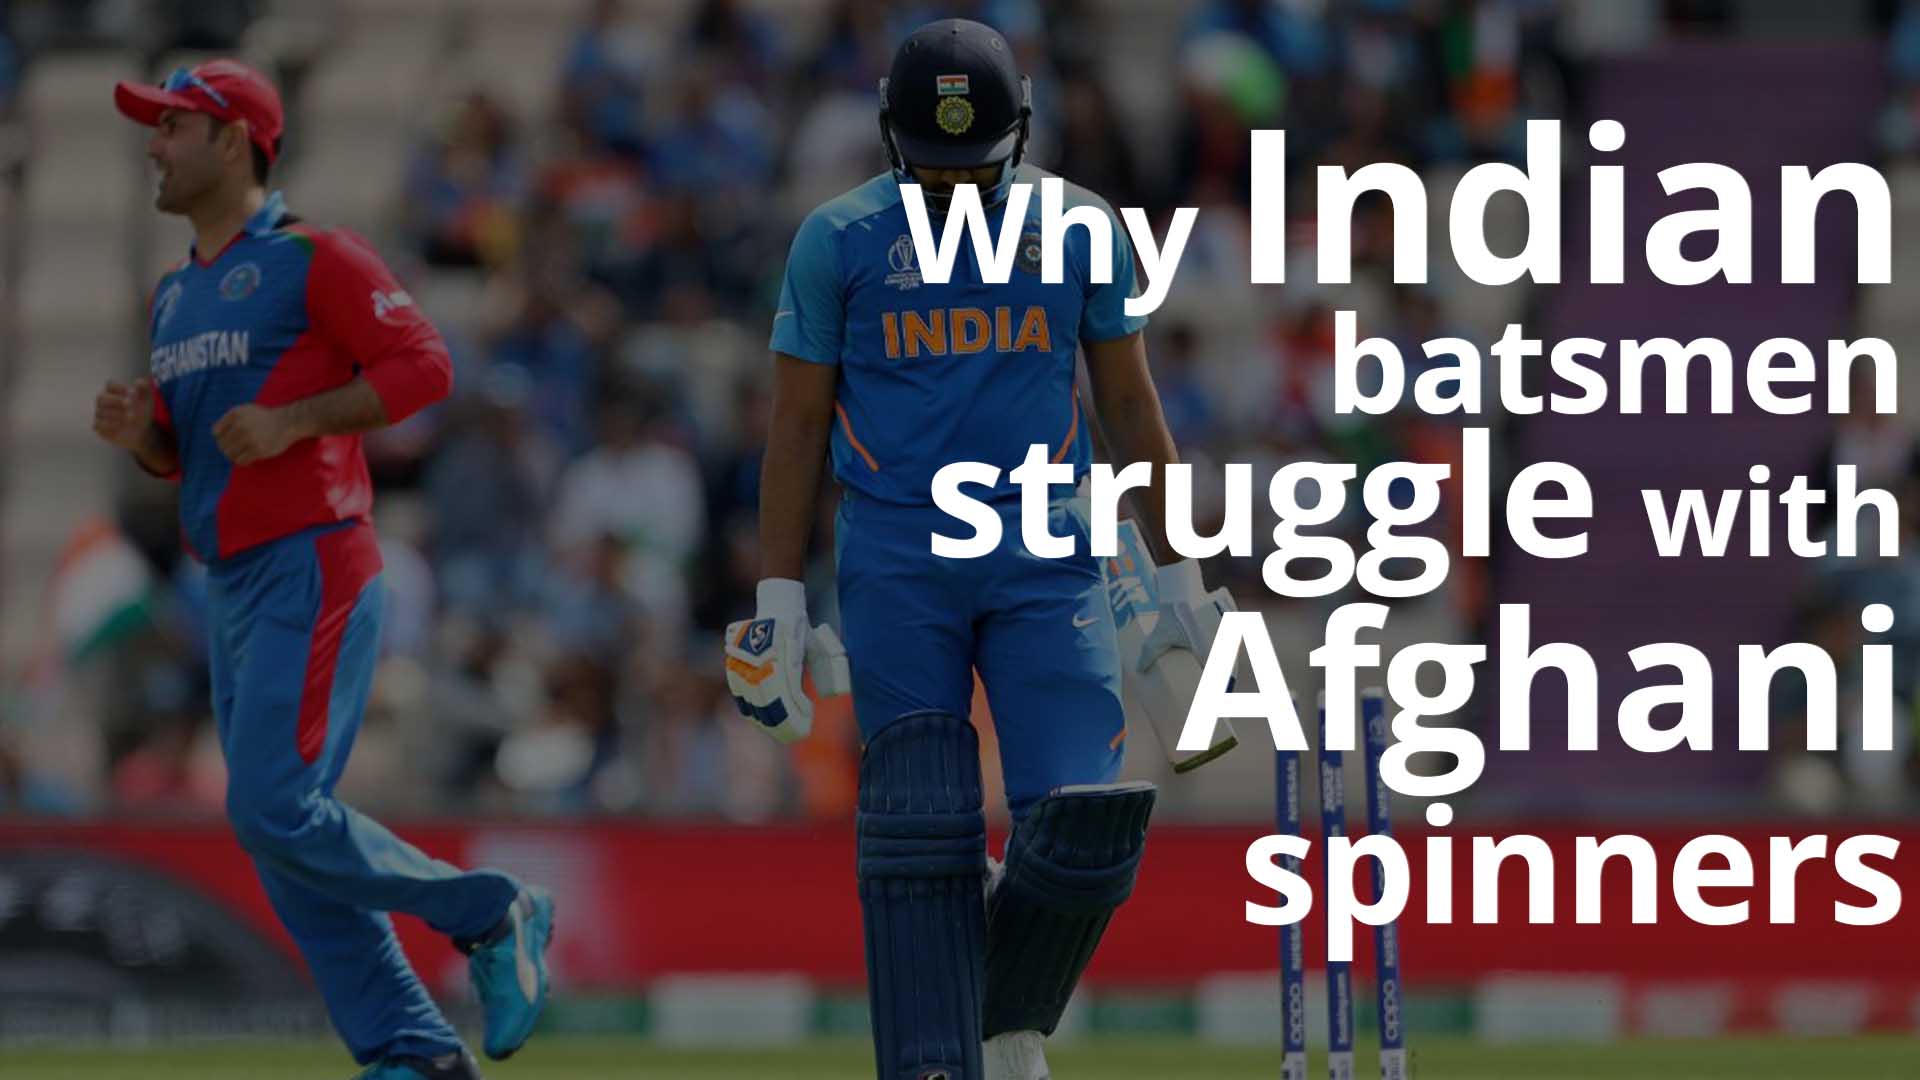 India, Afghanistan, Batsmen, Spinners, Bowler, Cricket, the federal, english news website